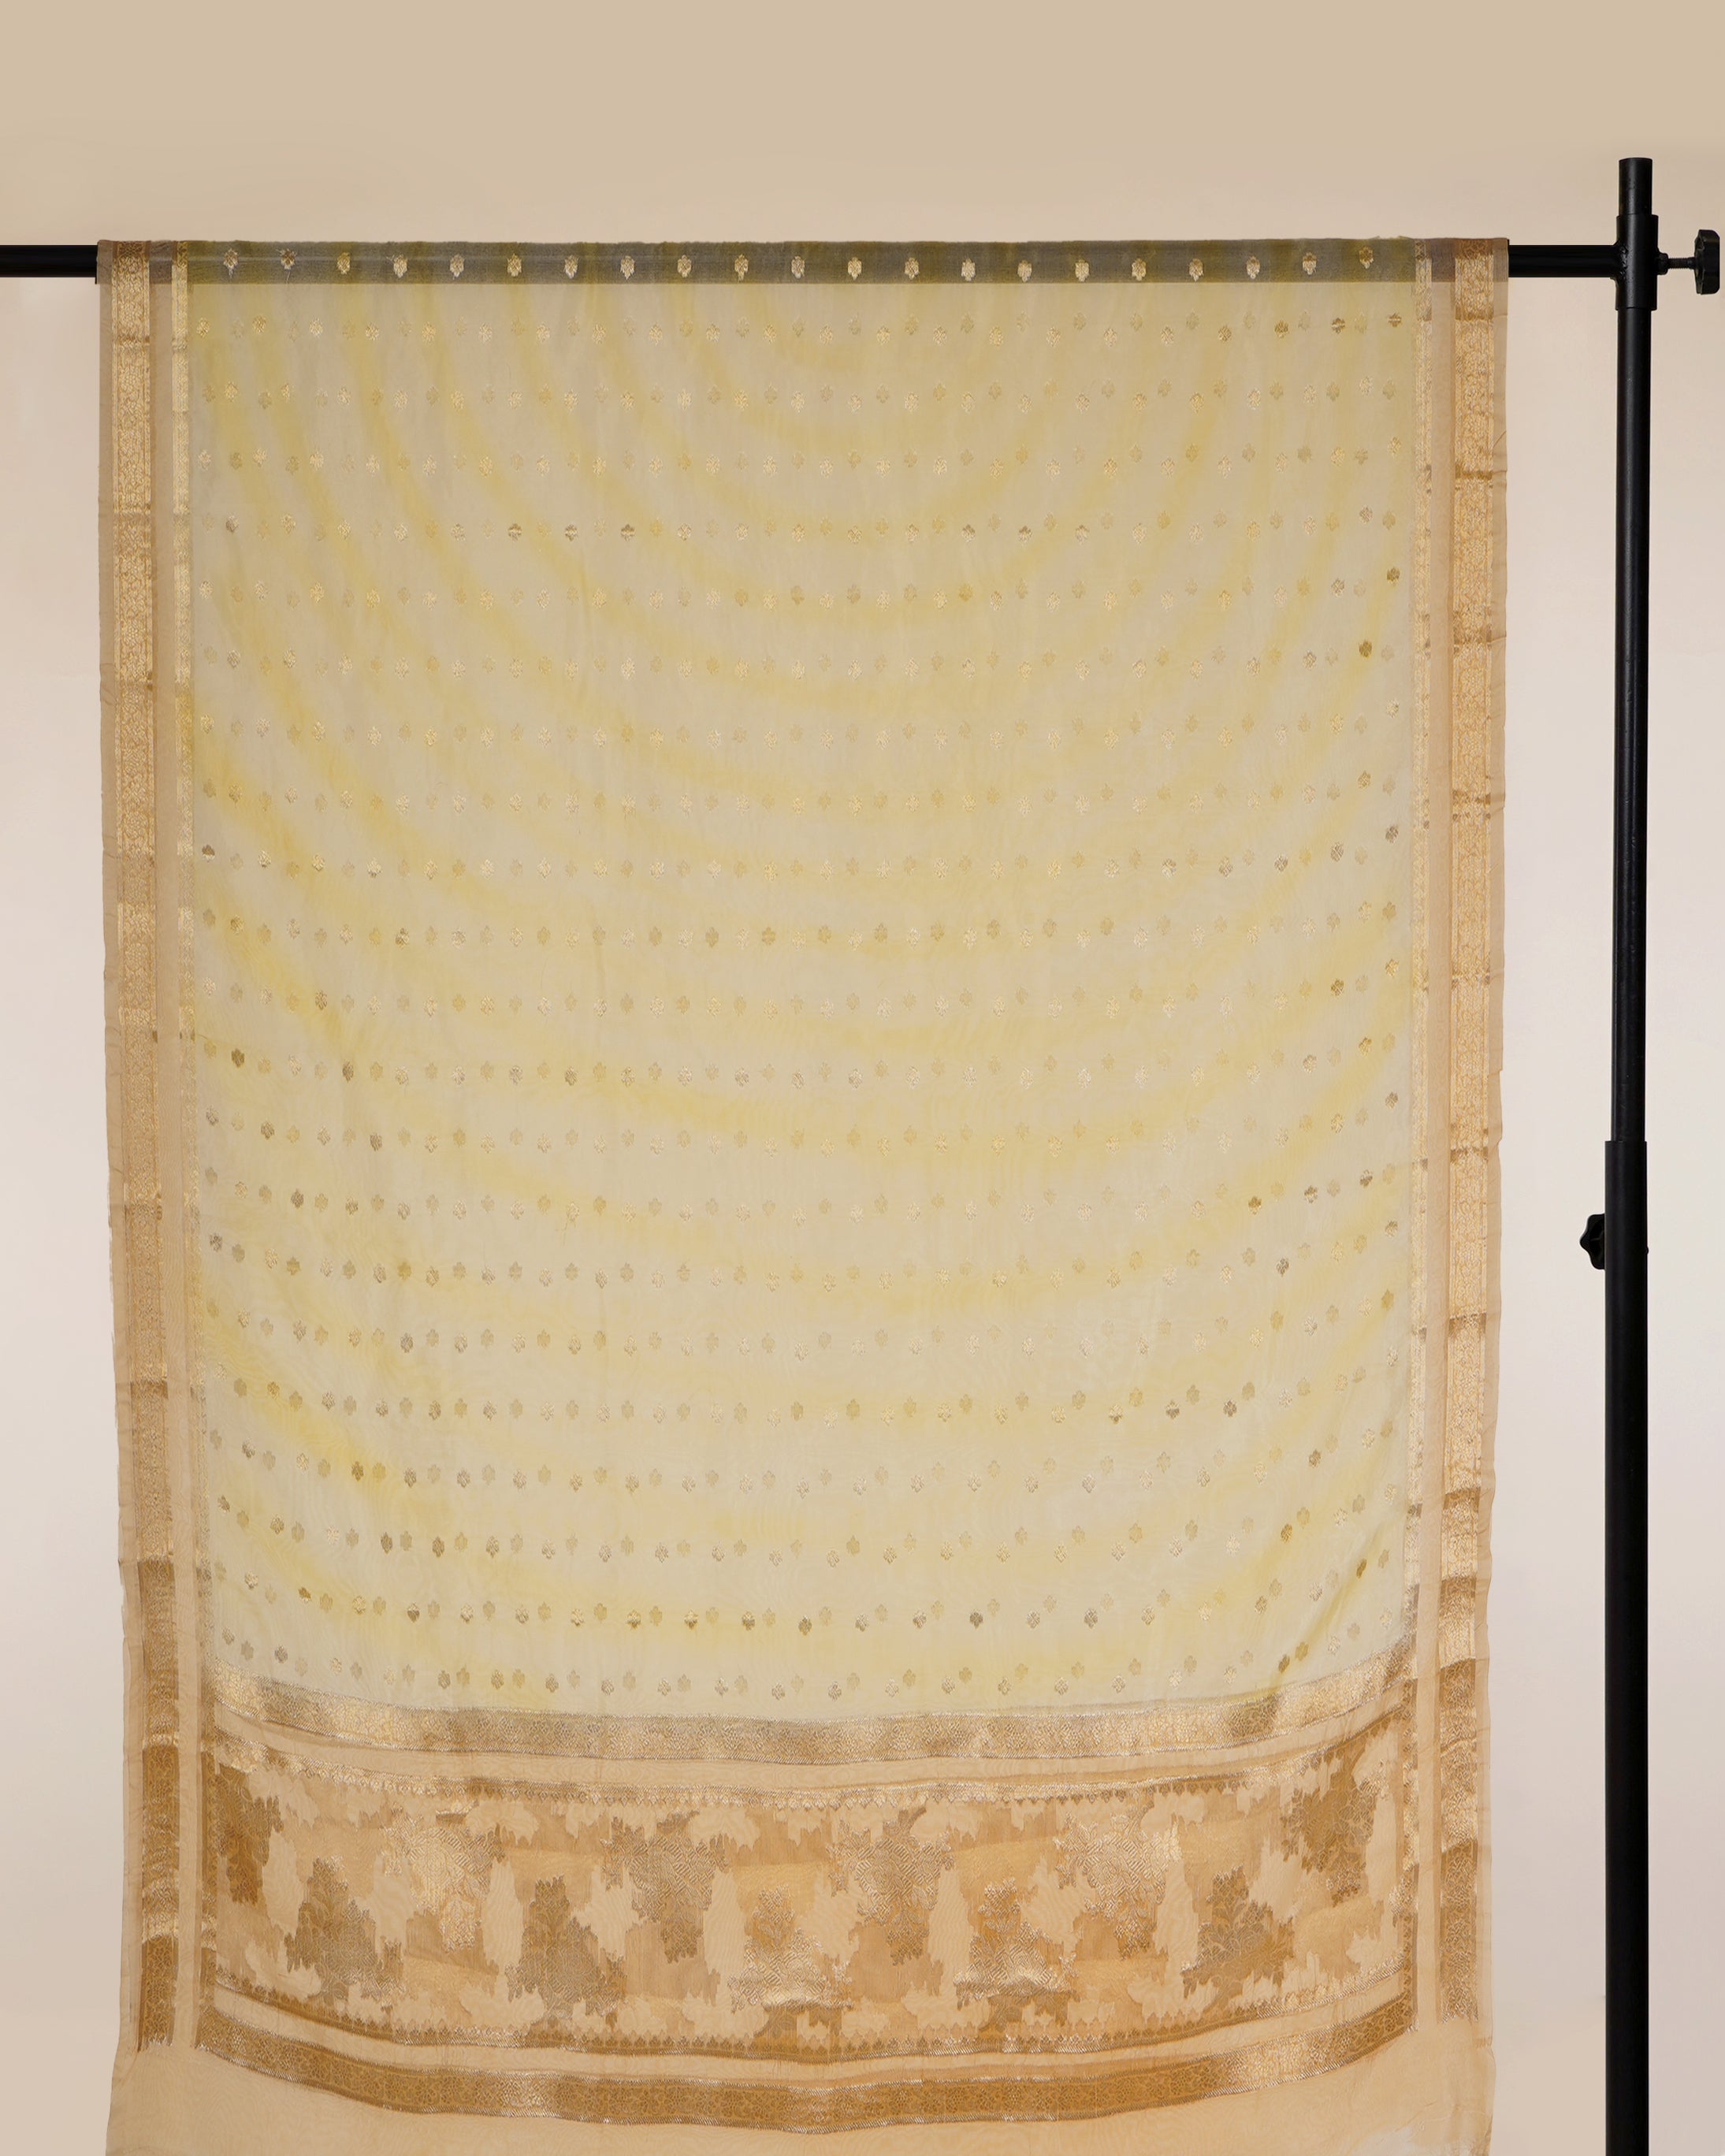 Apricot Cream-Yellow All Over Pattern Fancy Handwoven Chanderi Unstitched Suit Set (Top & Dupatta)